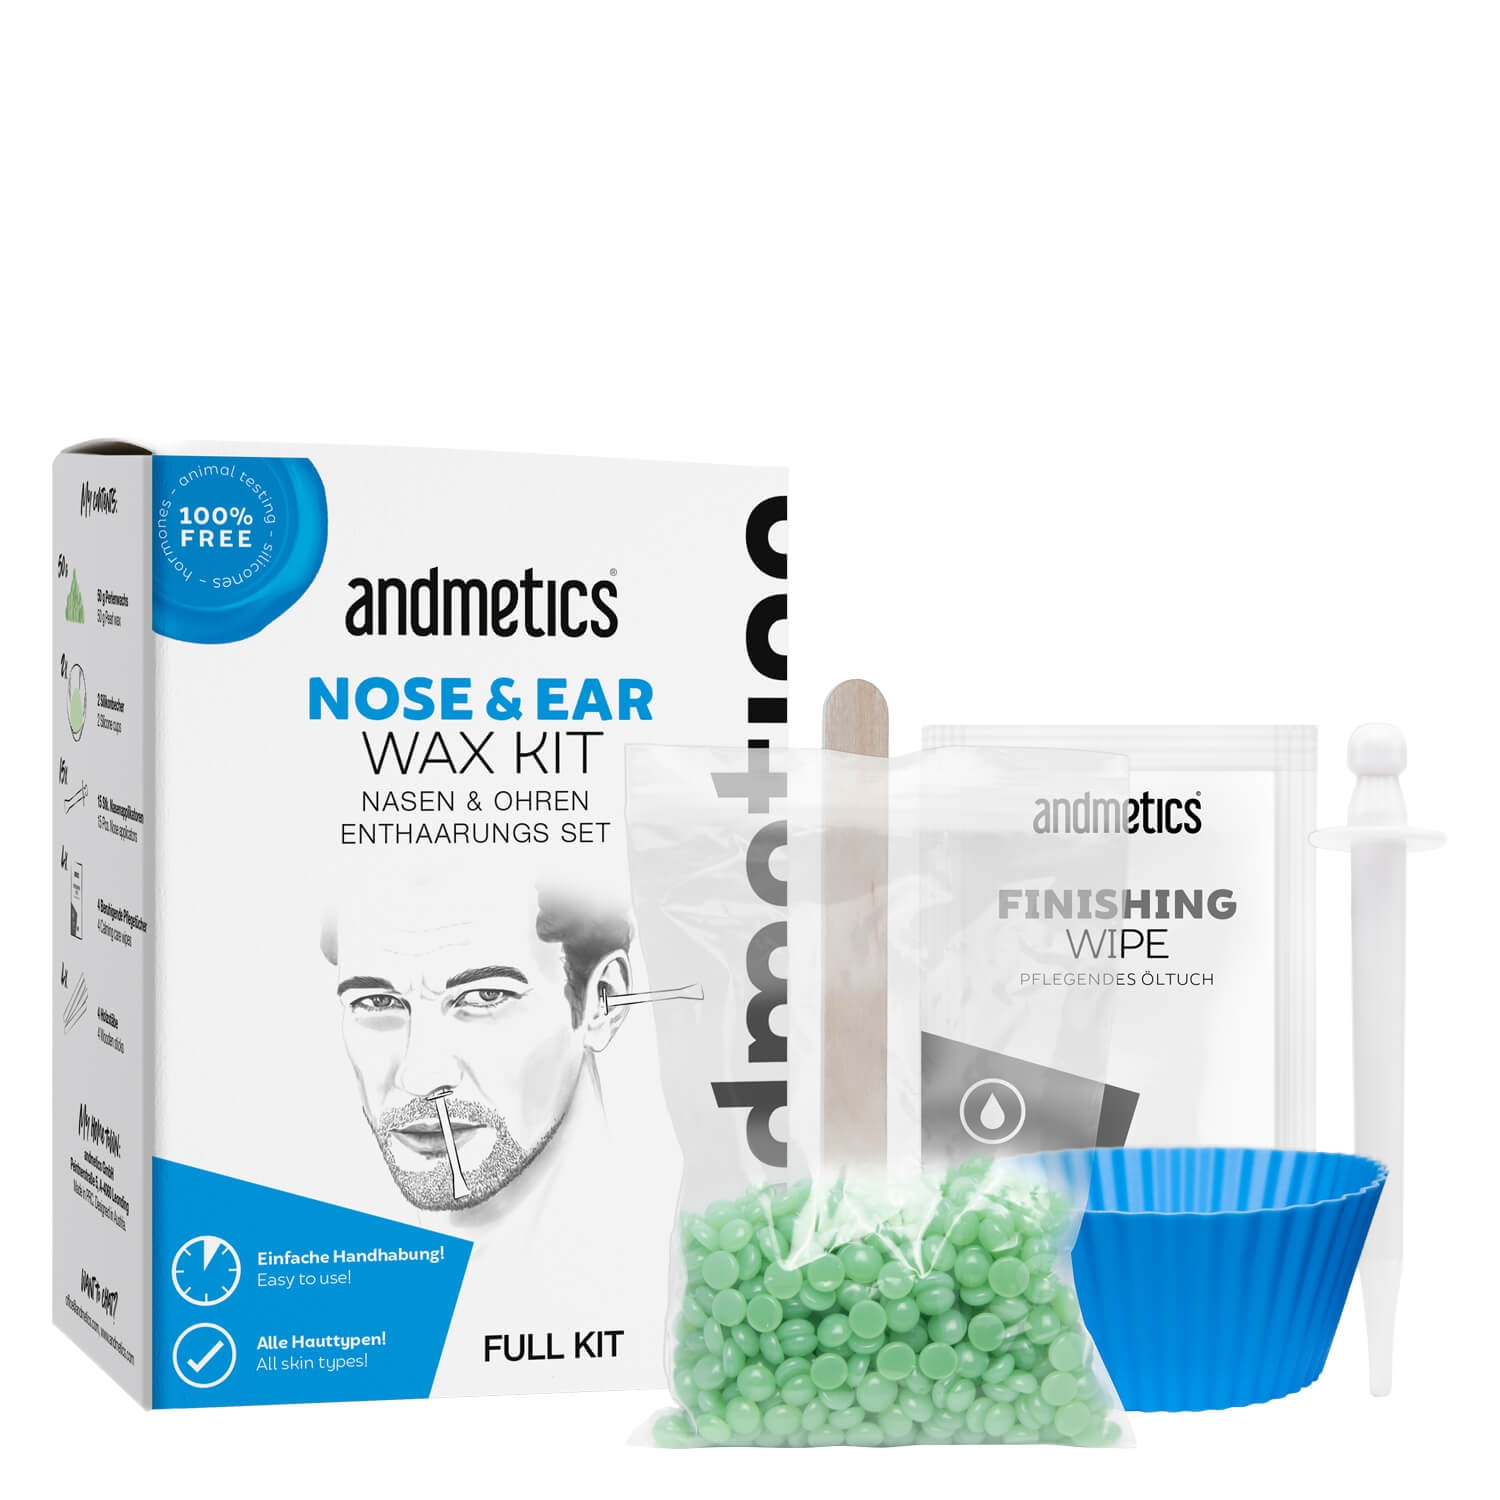 Product image from andmetics - Nose & Ear Wax Kit